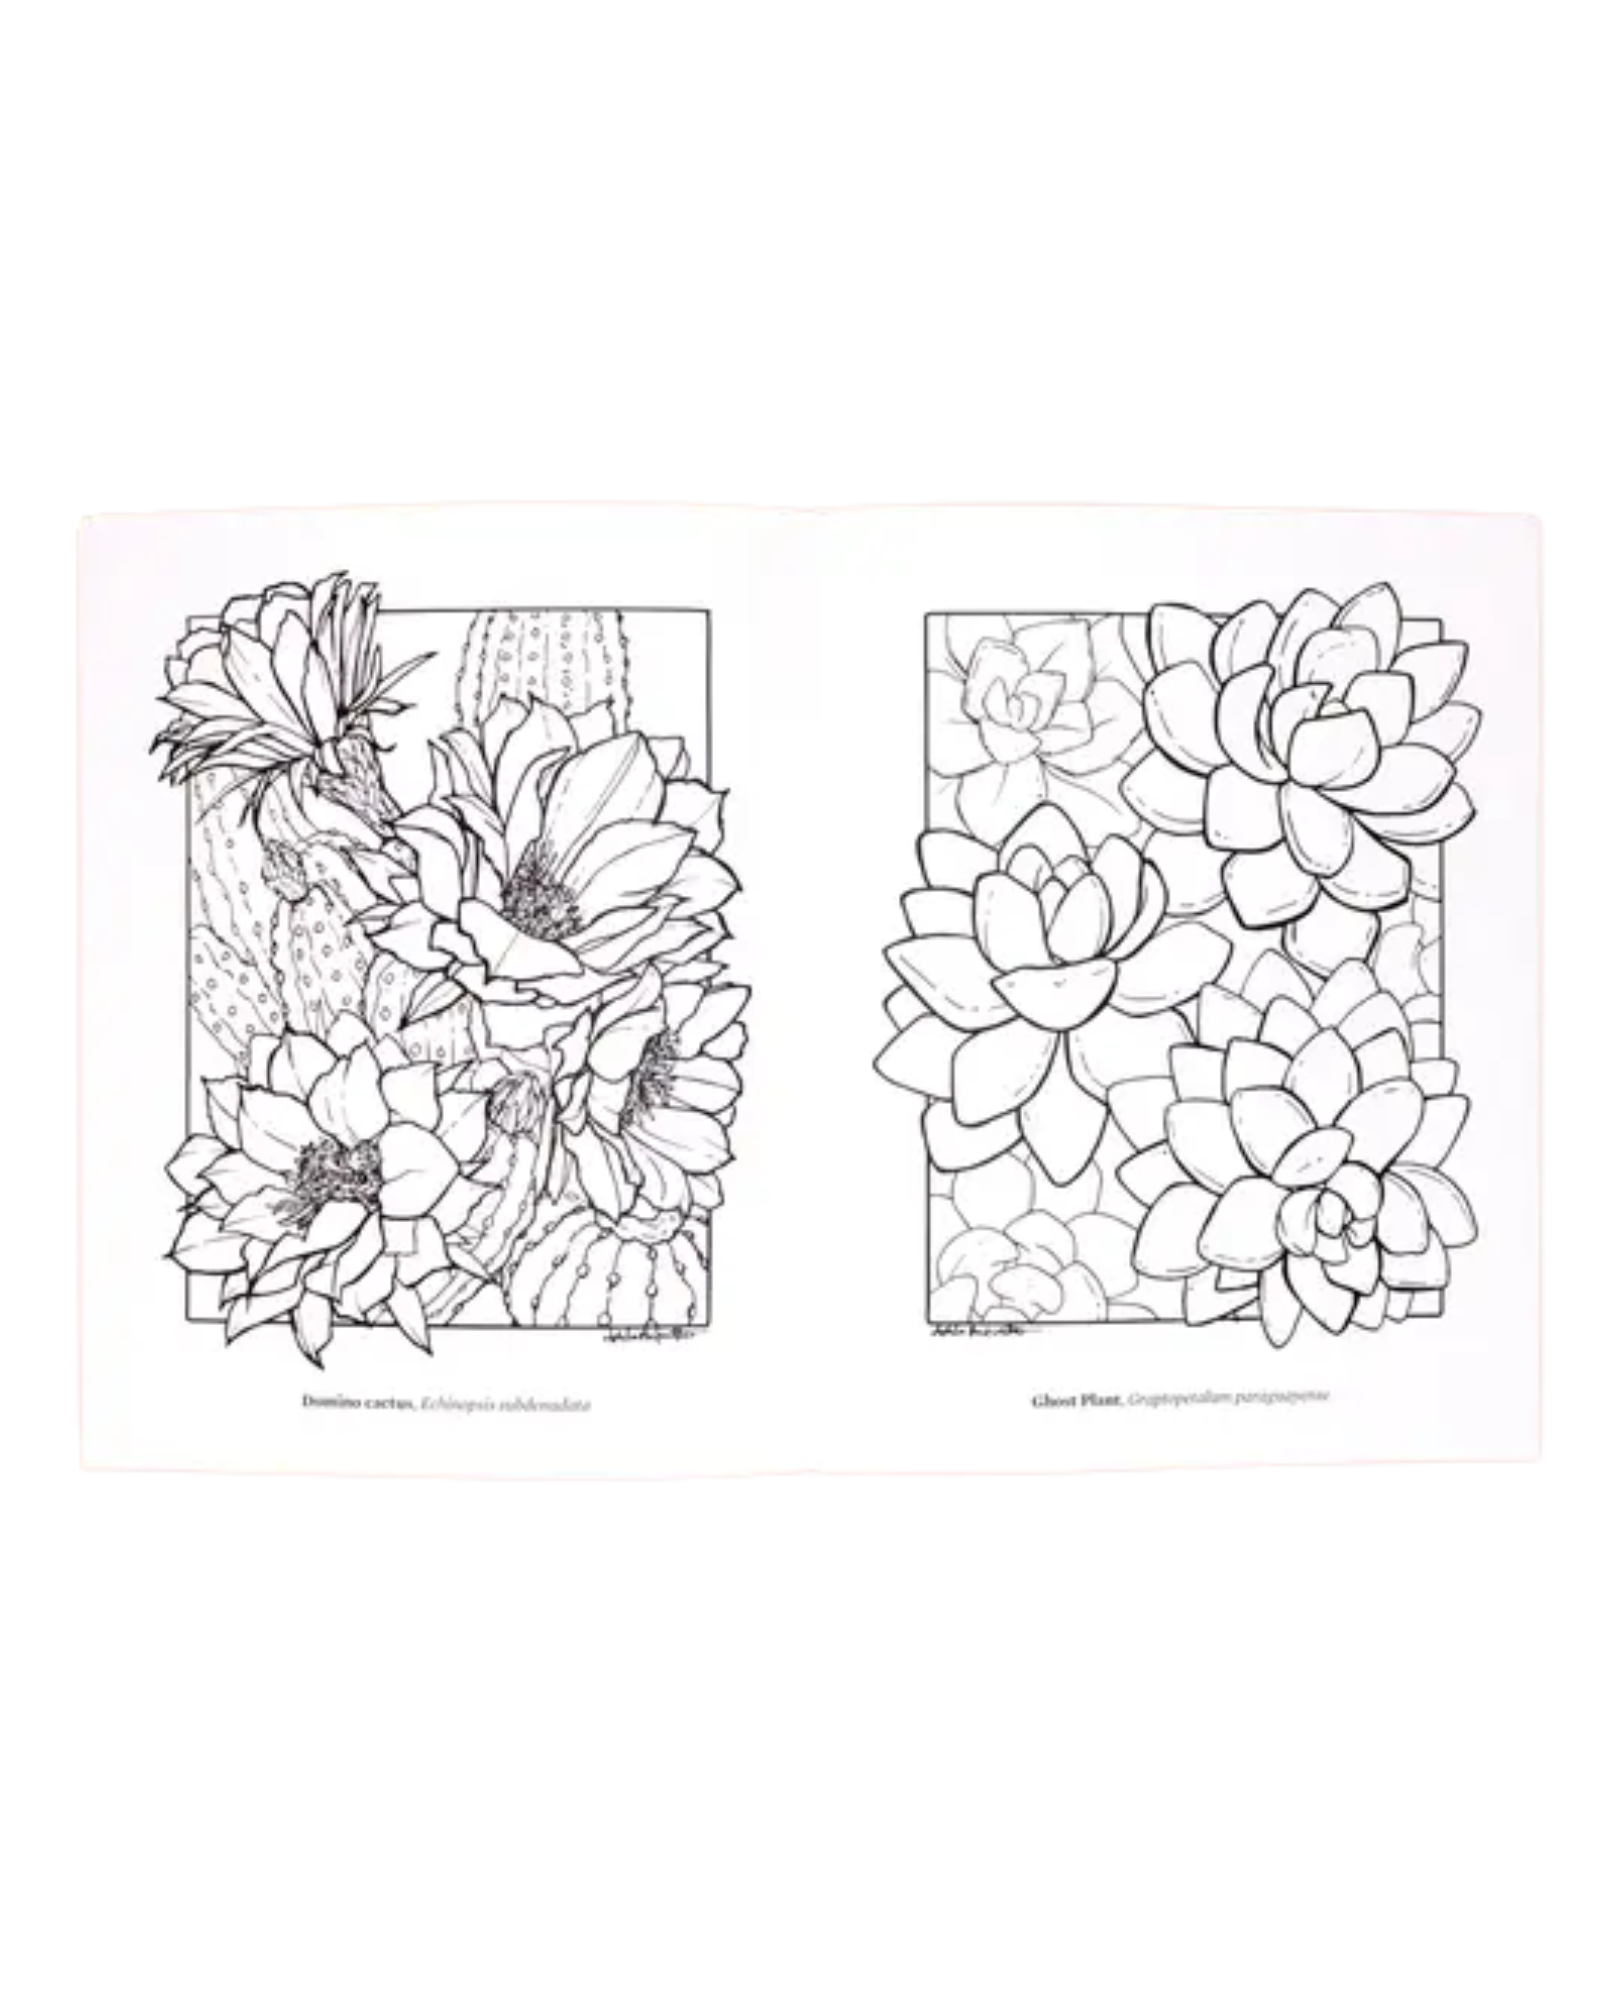 Interior coloring page examples of a saguaro bloom and succulent garden